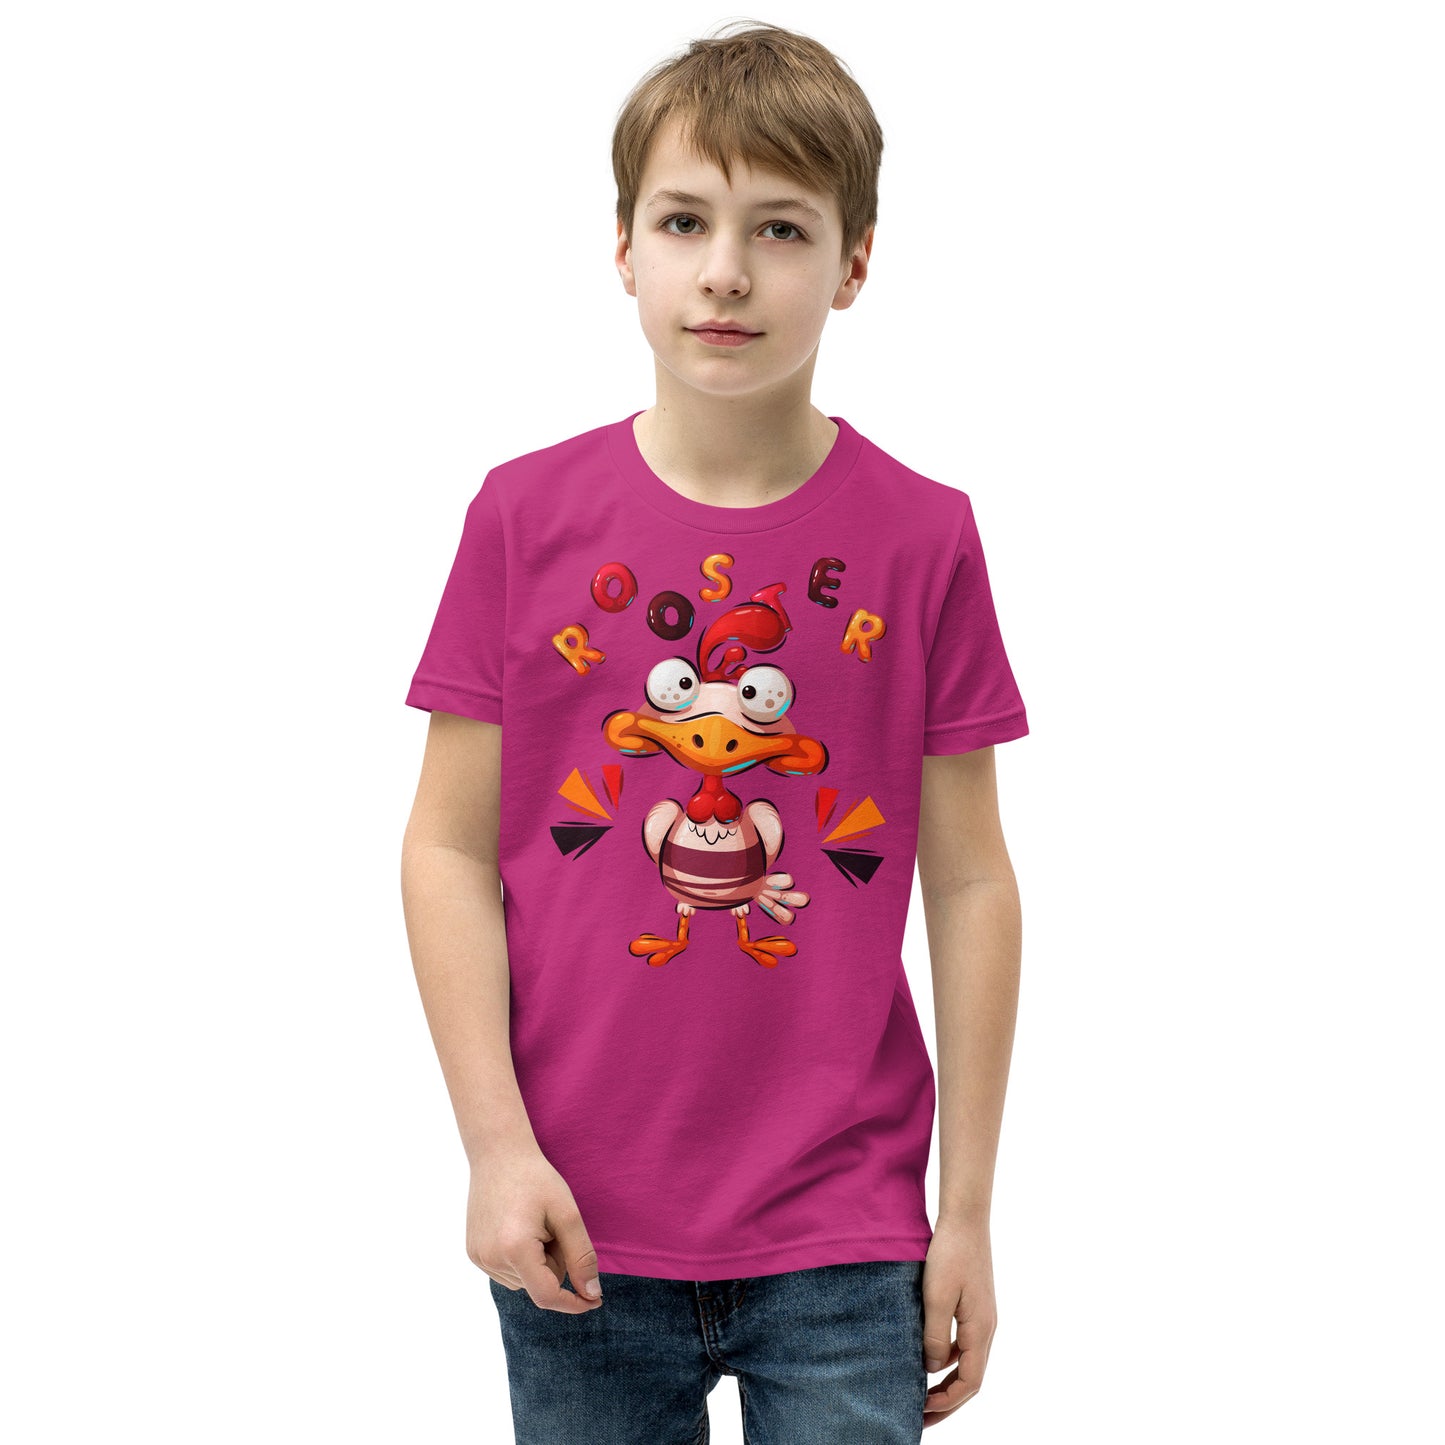 Crazy Rooster T-shirt, No. 0263